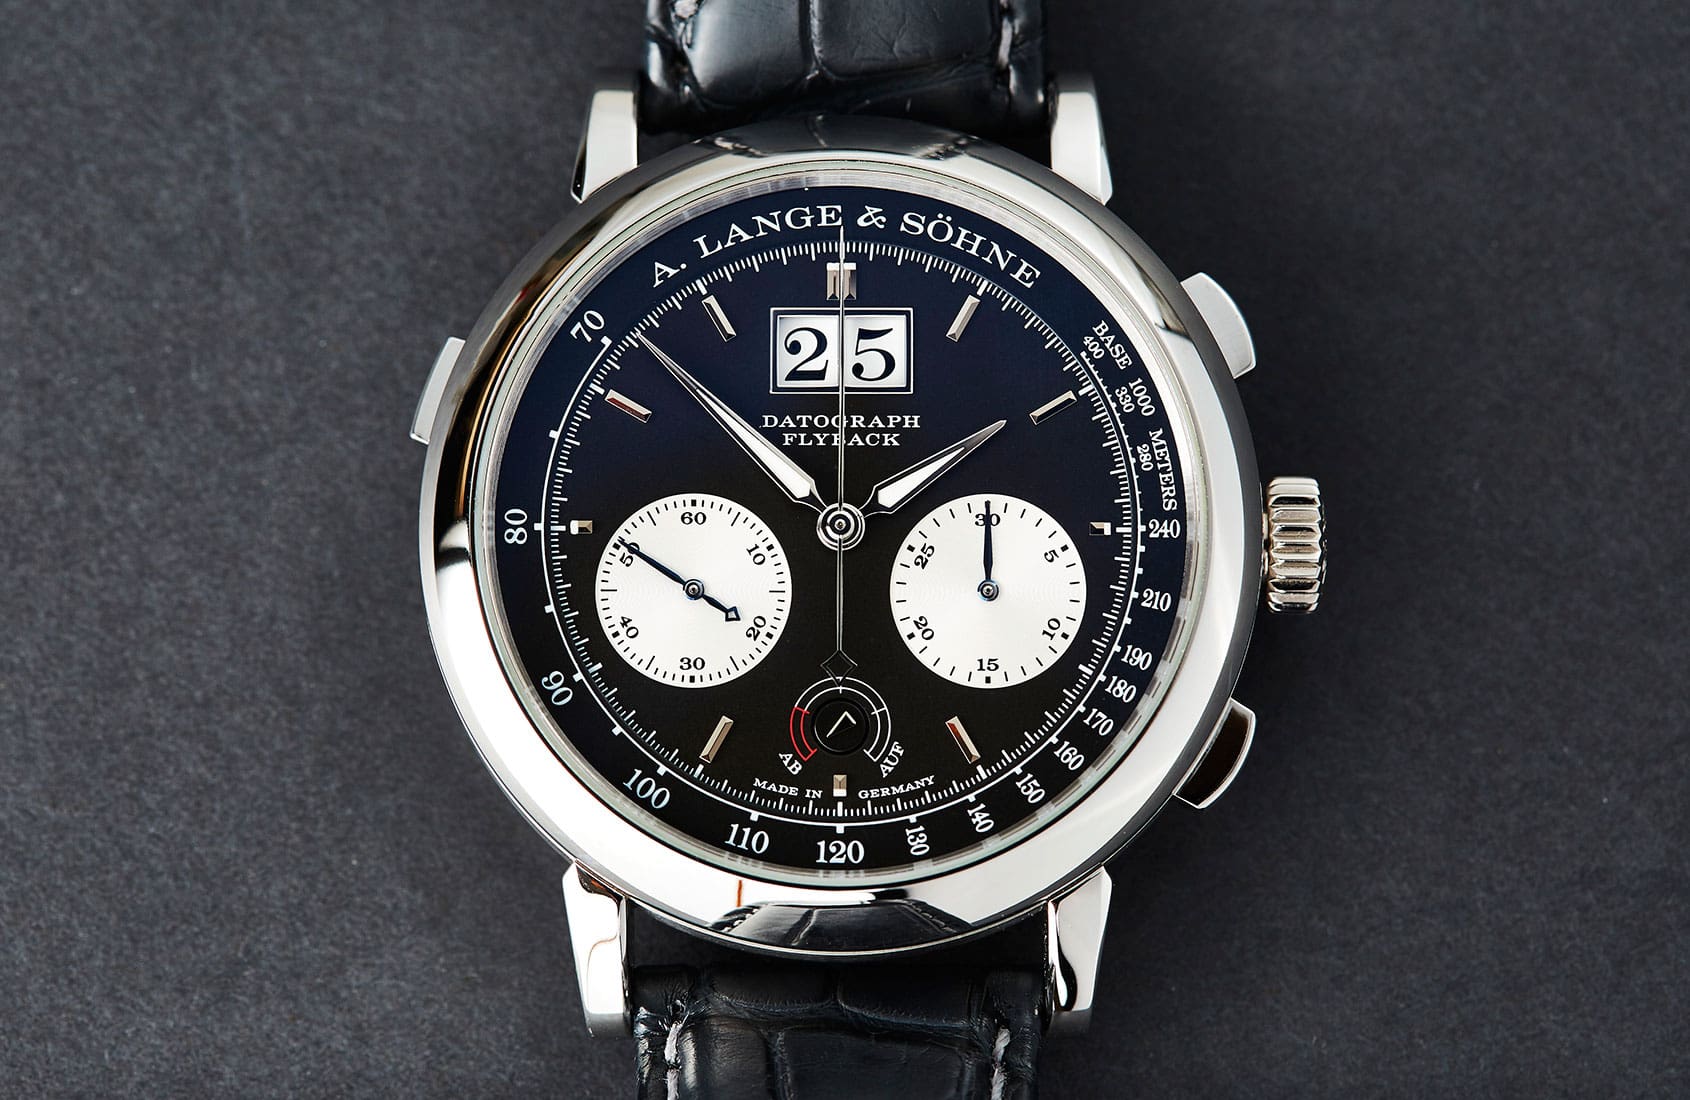 HANDS-ON: The greatest chronograph of our times – the A. Lange & Söhne Saxonia Datograph Up/Down